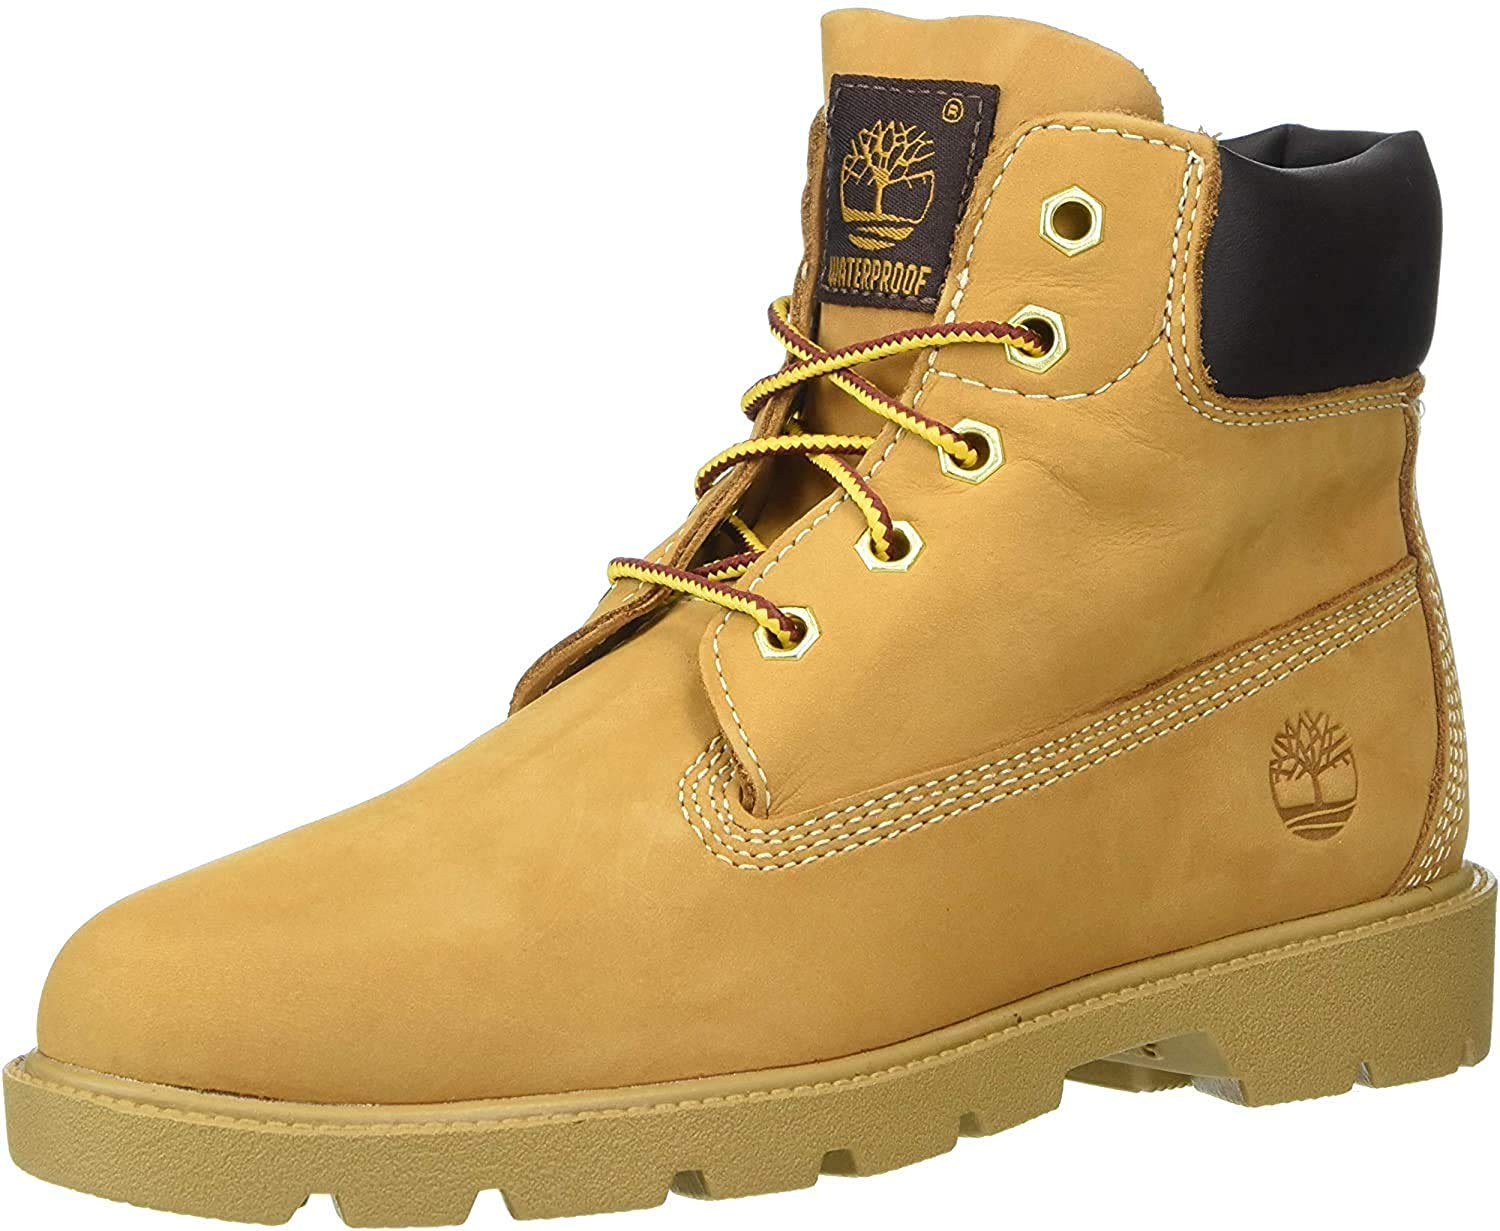 Timberland Unisex-Child Children's Classic 6-inch Waterproof Ankle Boot